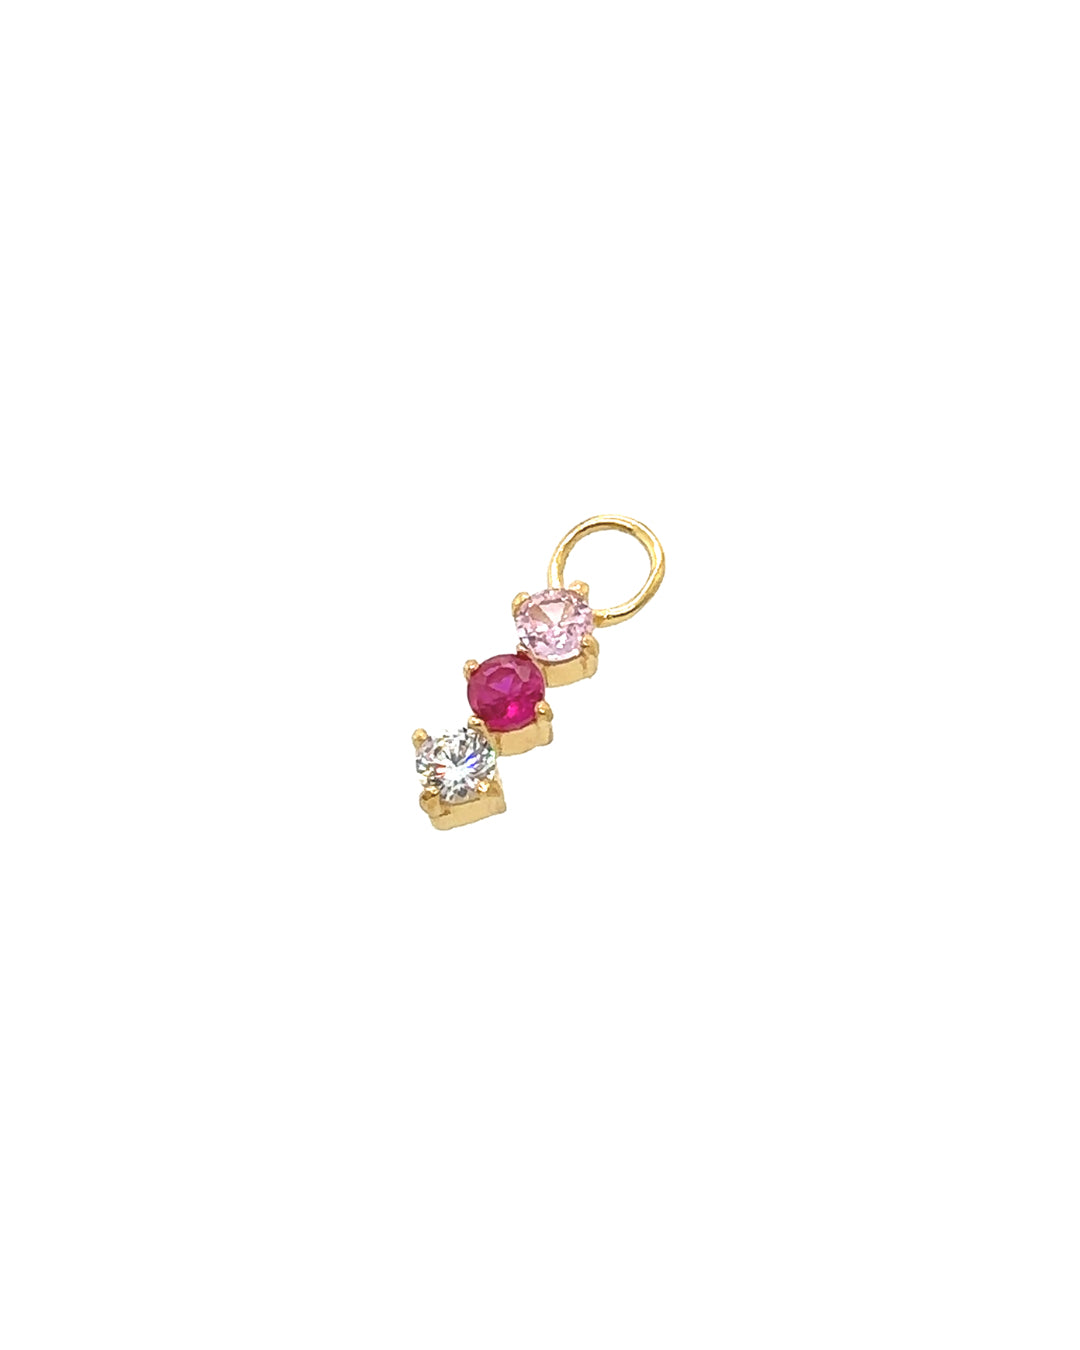 14k gold fill earring charm for hoops in ruby red, pink tourmaline and white diamond cubic zirconia 